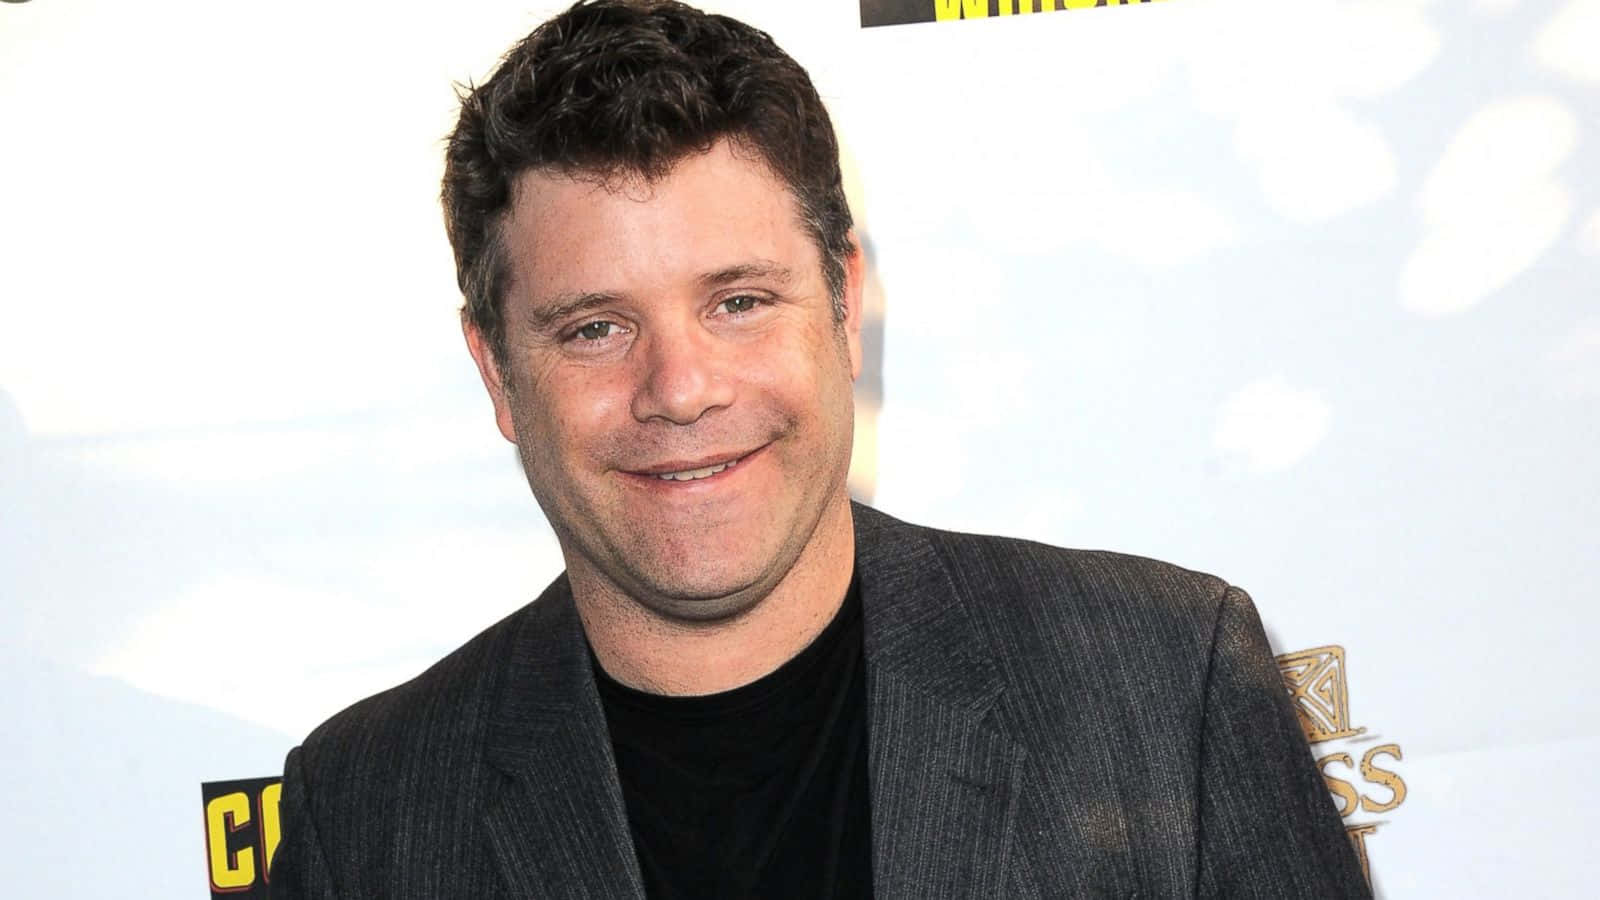 Sean Astin Poses Majestically in a Styled Photo Shoot Wallpaper